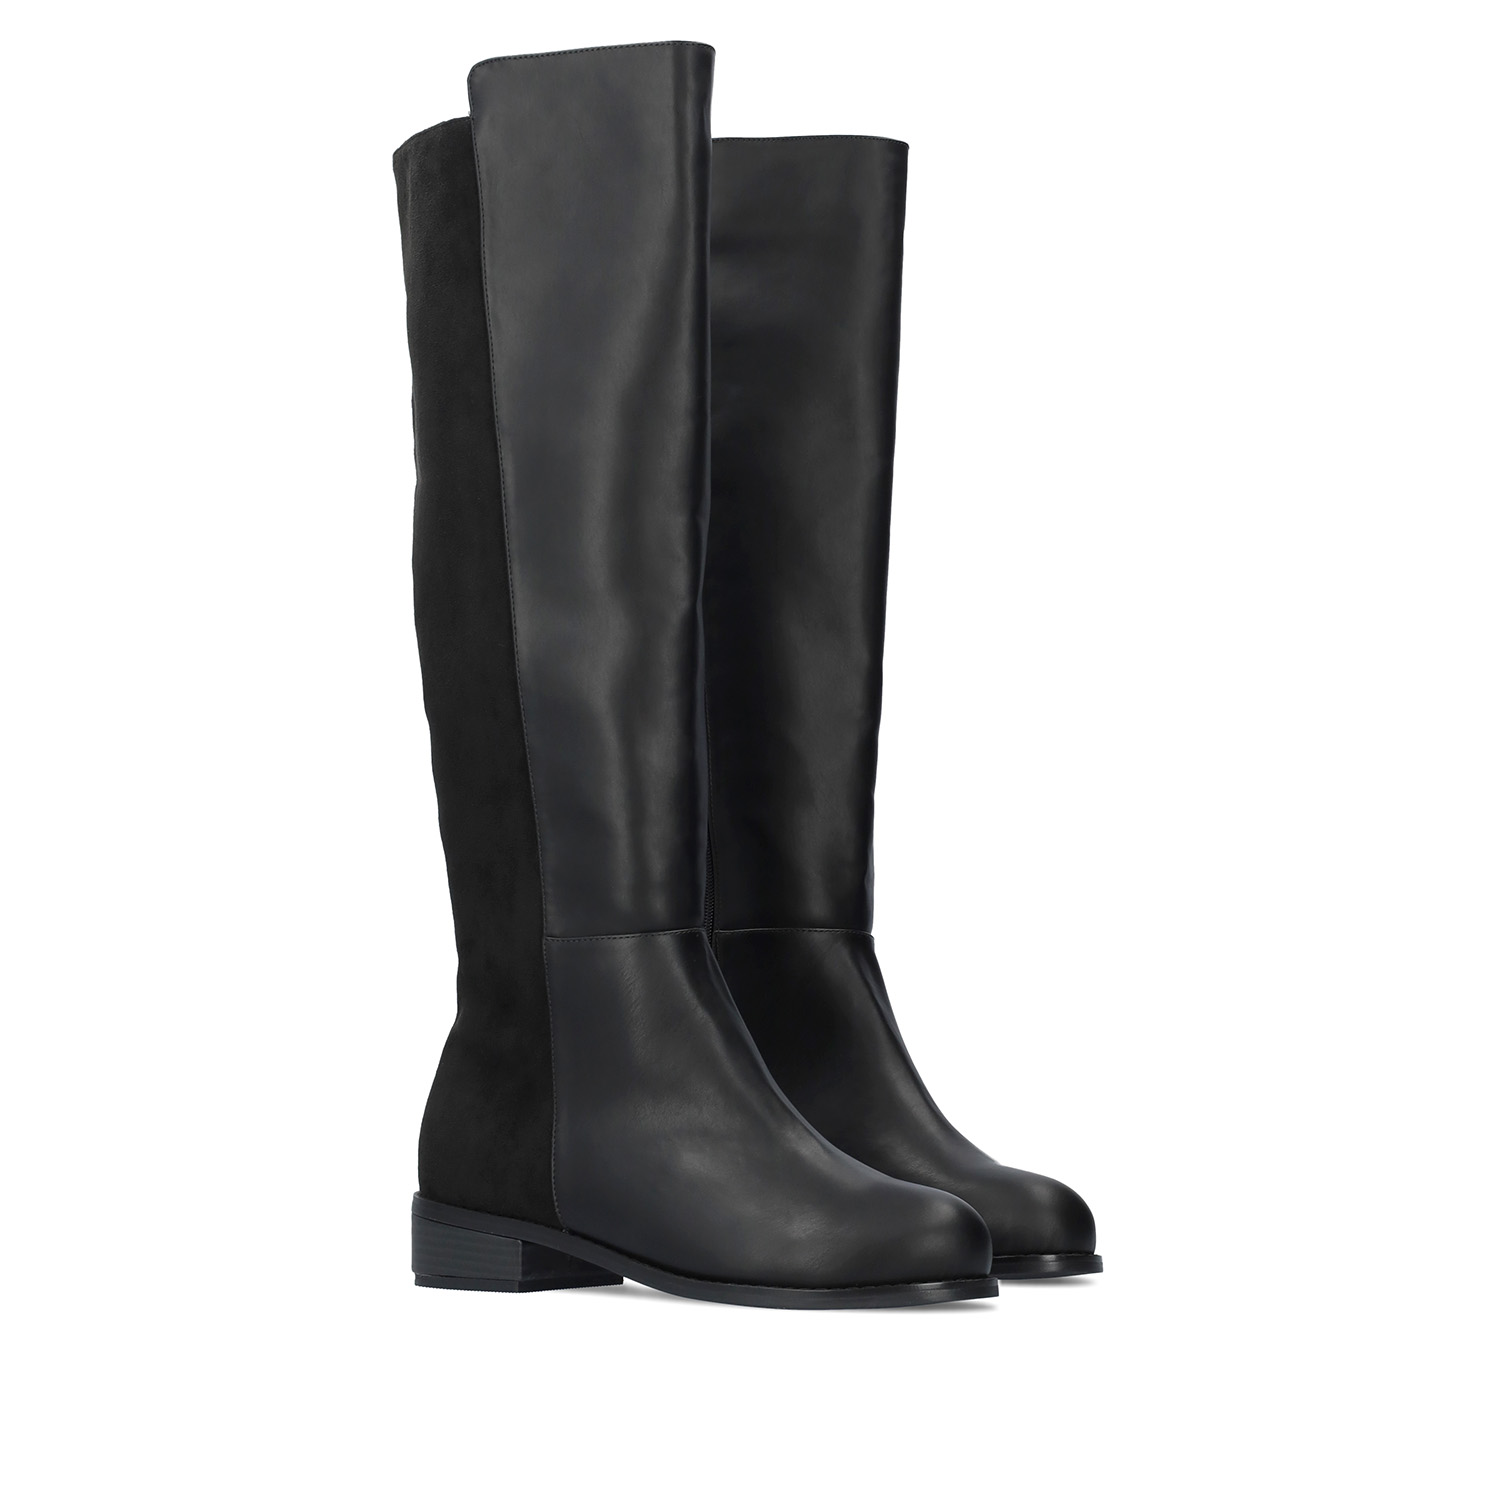 Flat knee-high boots combined in black colour. 